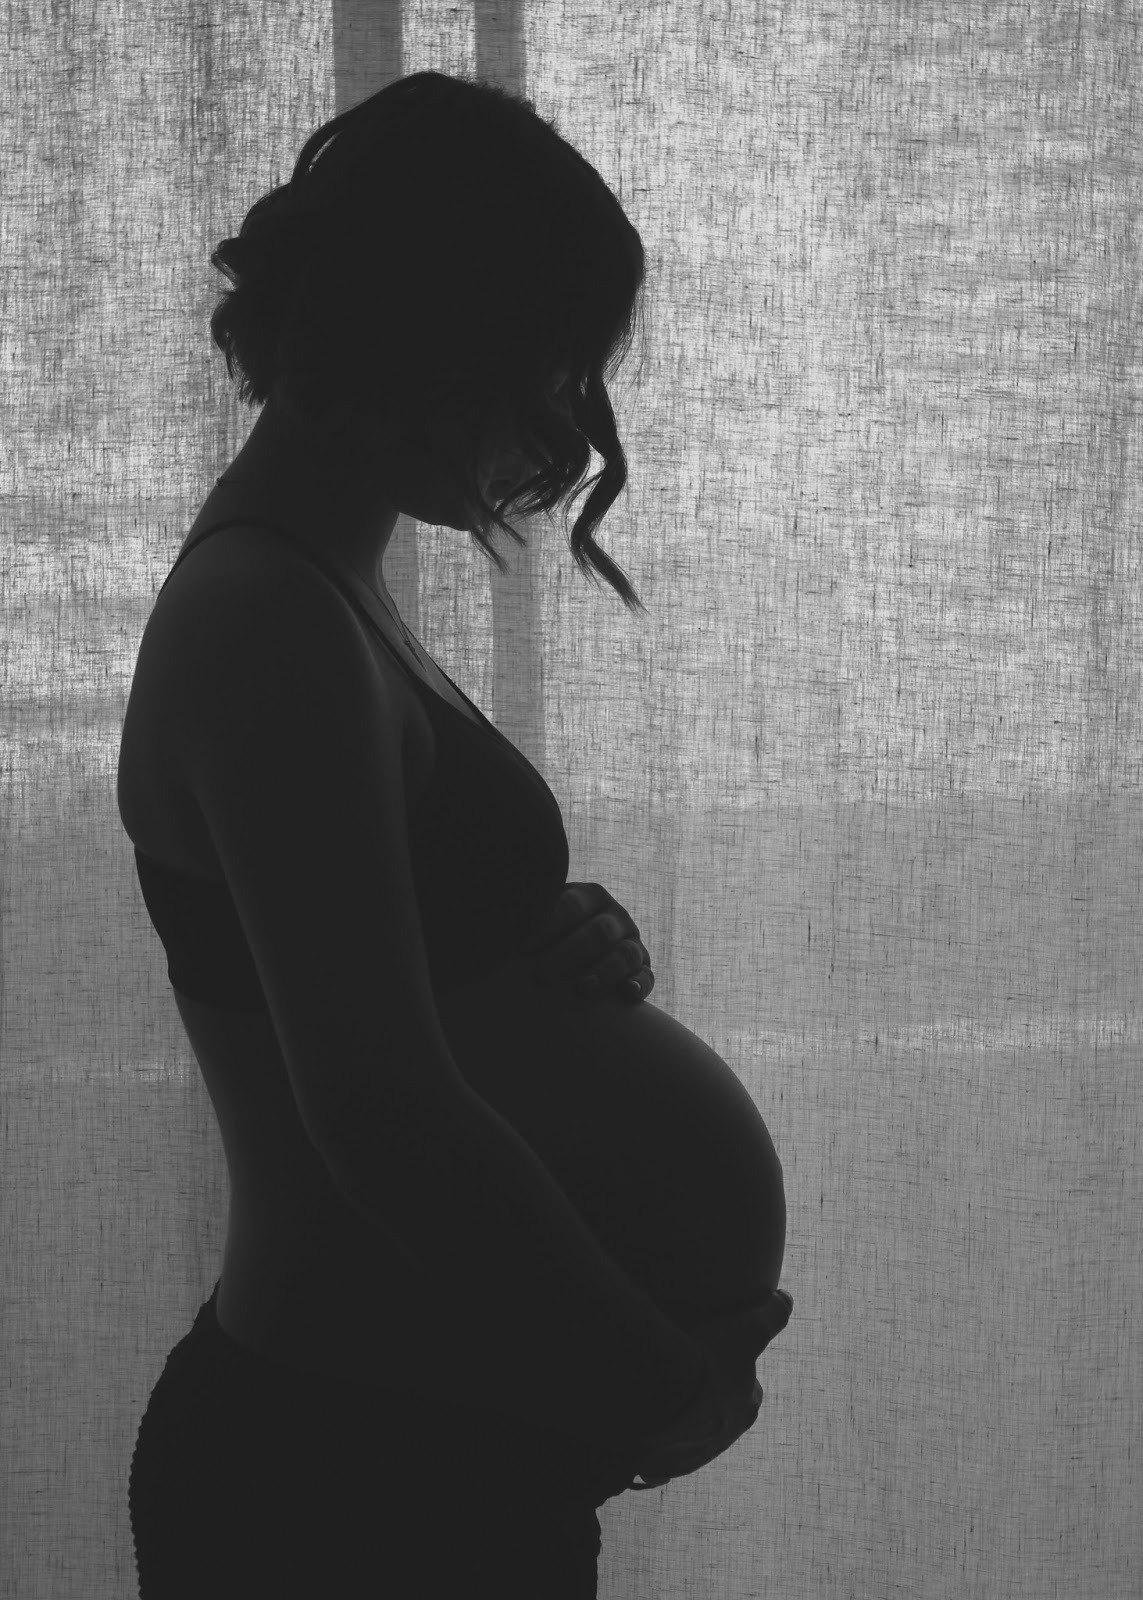 maternity photoshoot ideas at home - Silhouette